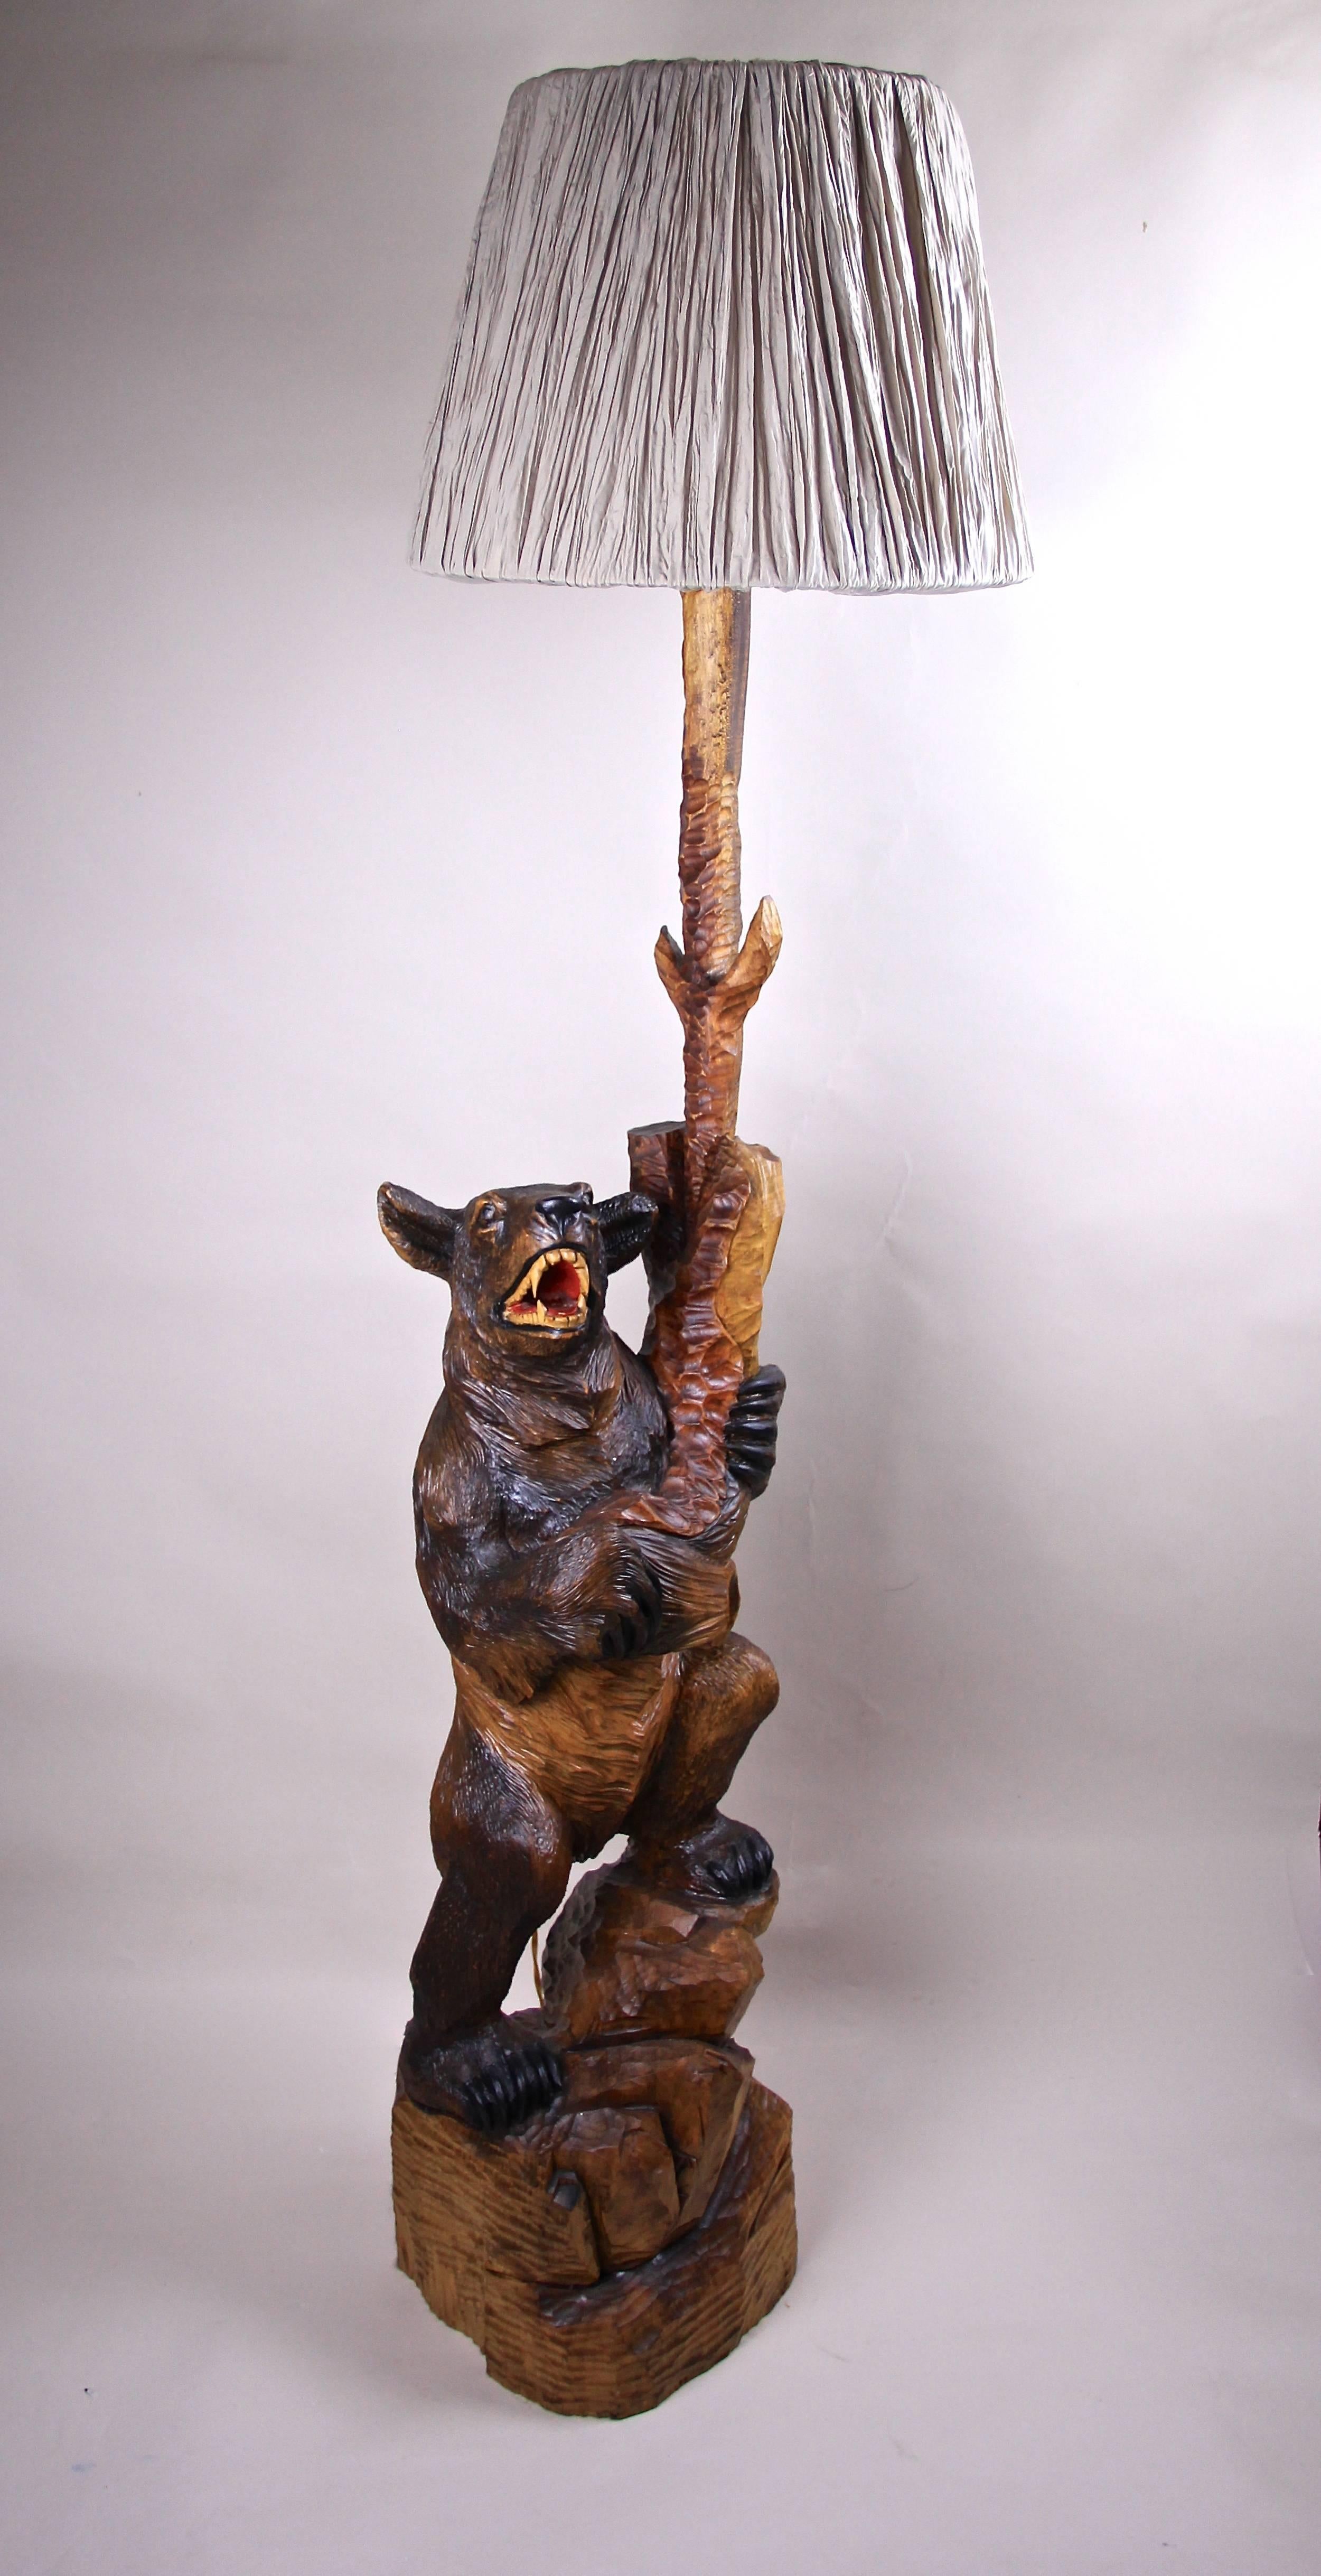 20th Century Black Forest Floor Lamp Hand-Carved, Germany, circa 1940